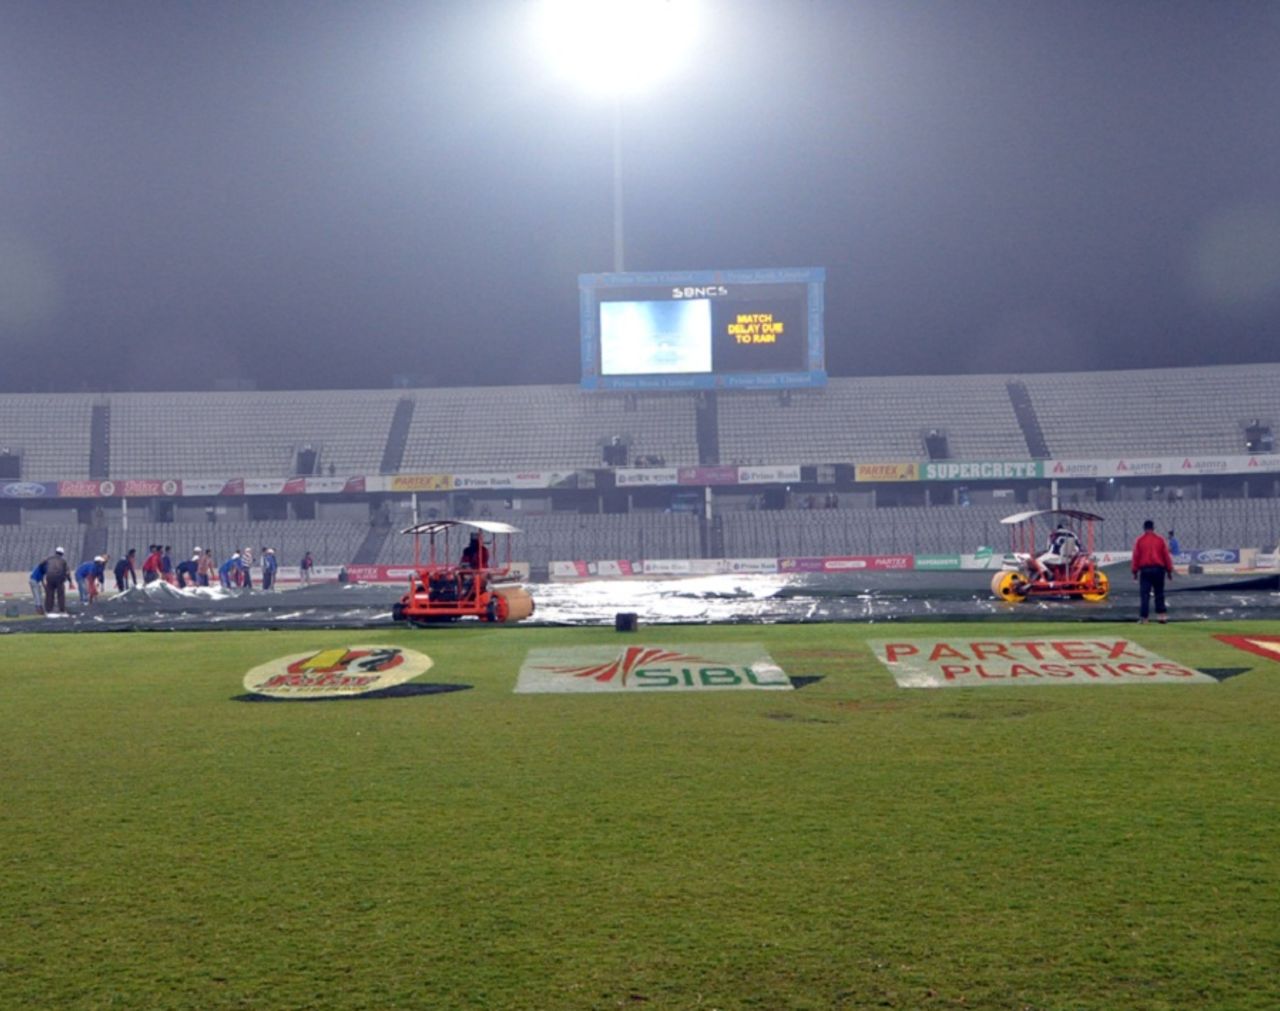 The semi-final was washed out and postponed to the next day, Chittagong Kings v Sylhet Royals, BPL, Mirpur, February 17, 2013